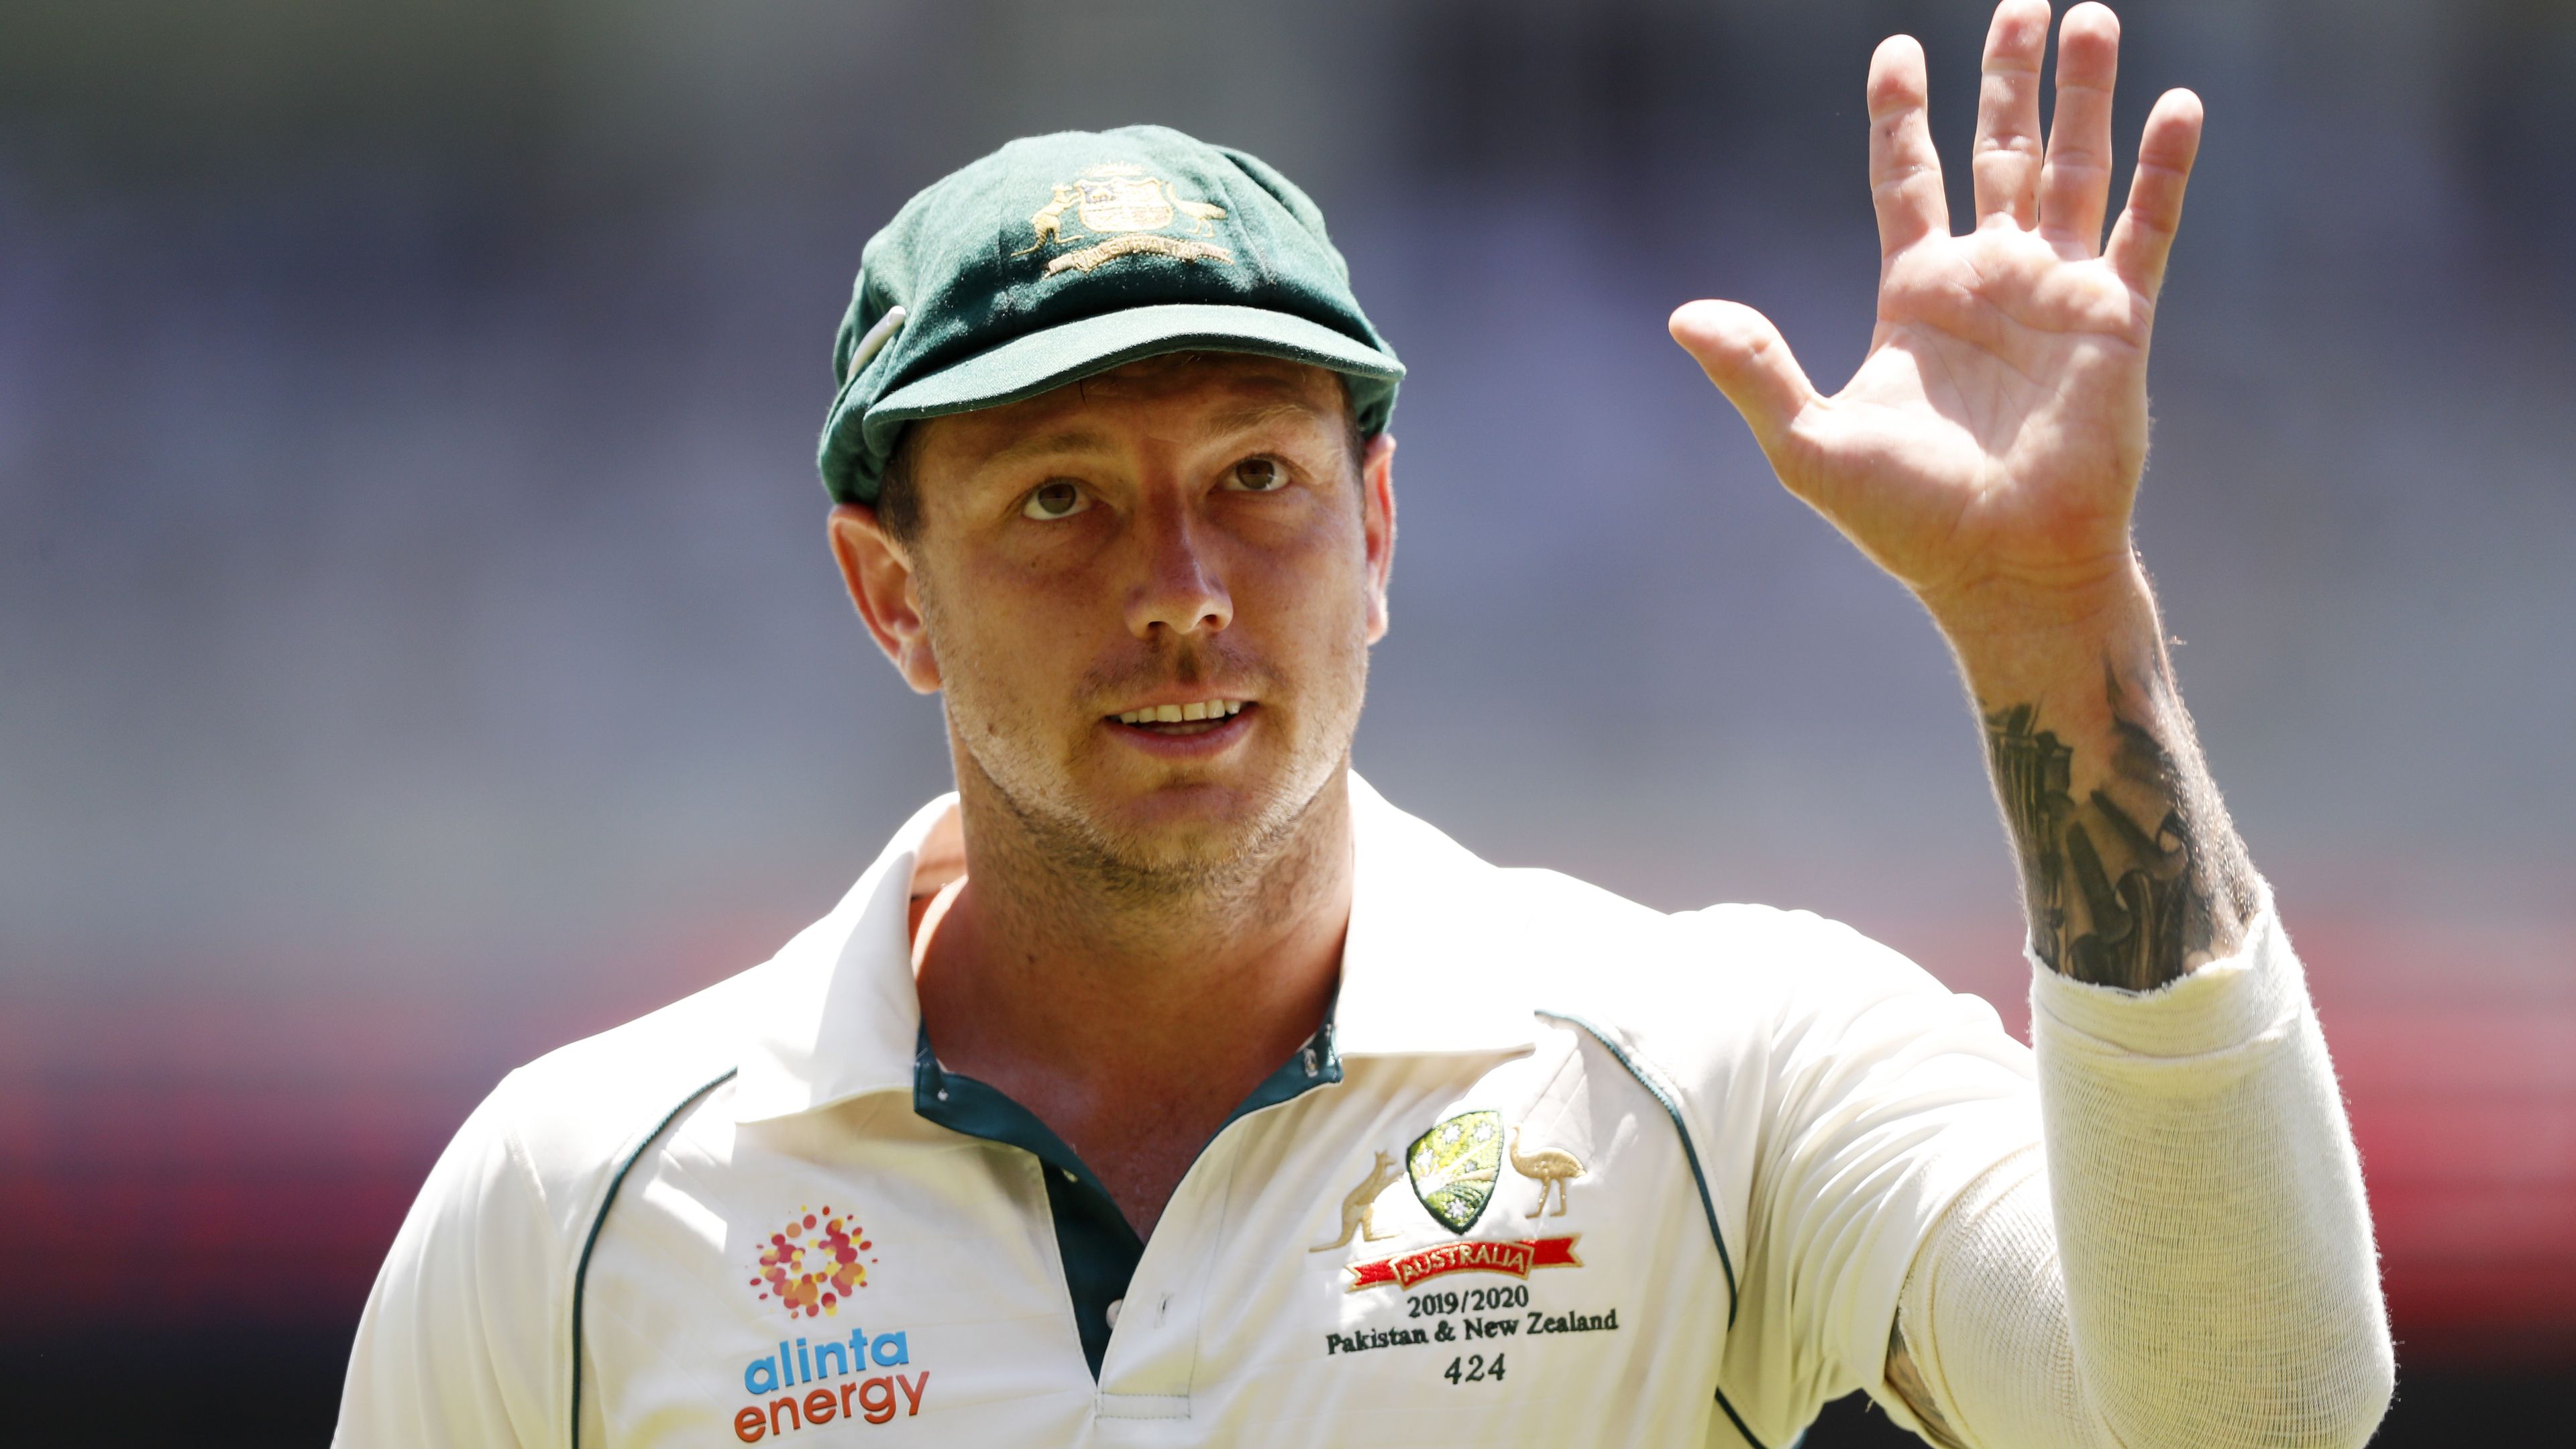 EXCLUSIVE: Unlucky James Pattinson a lock for any other Test team, says Ian Chappell